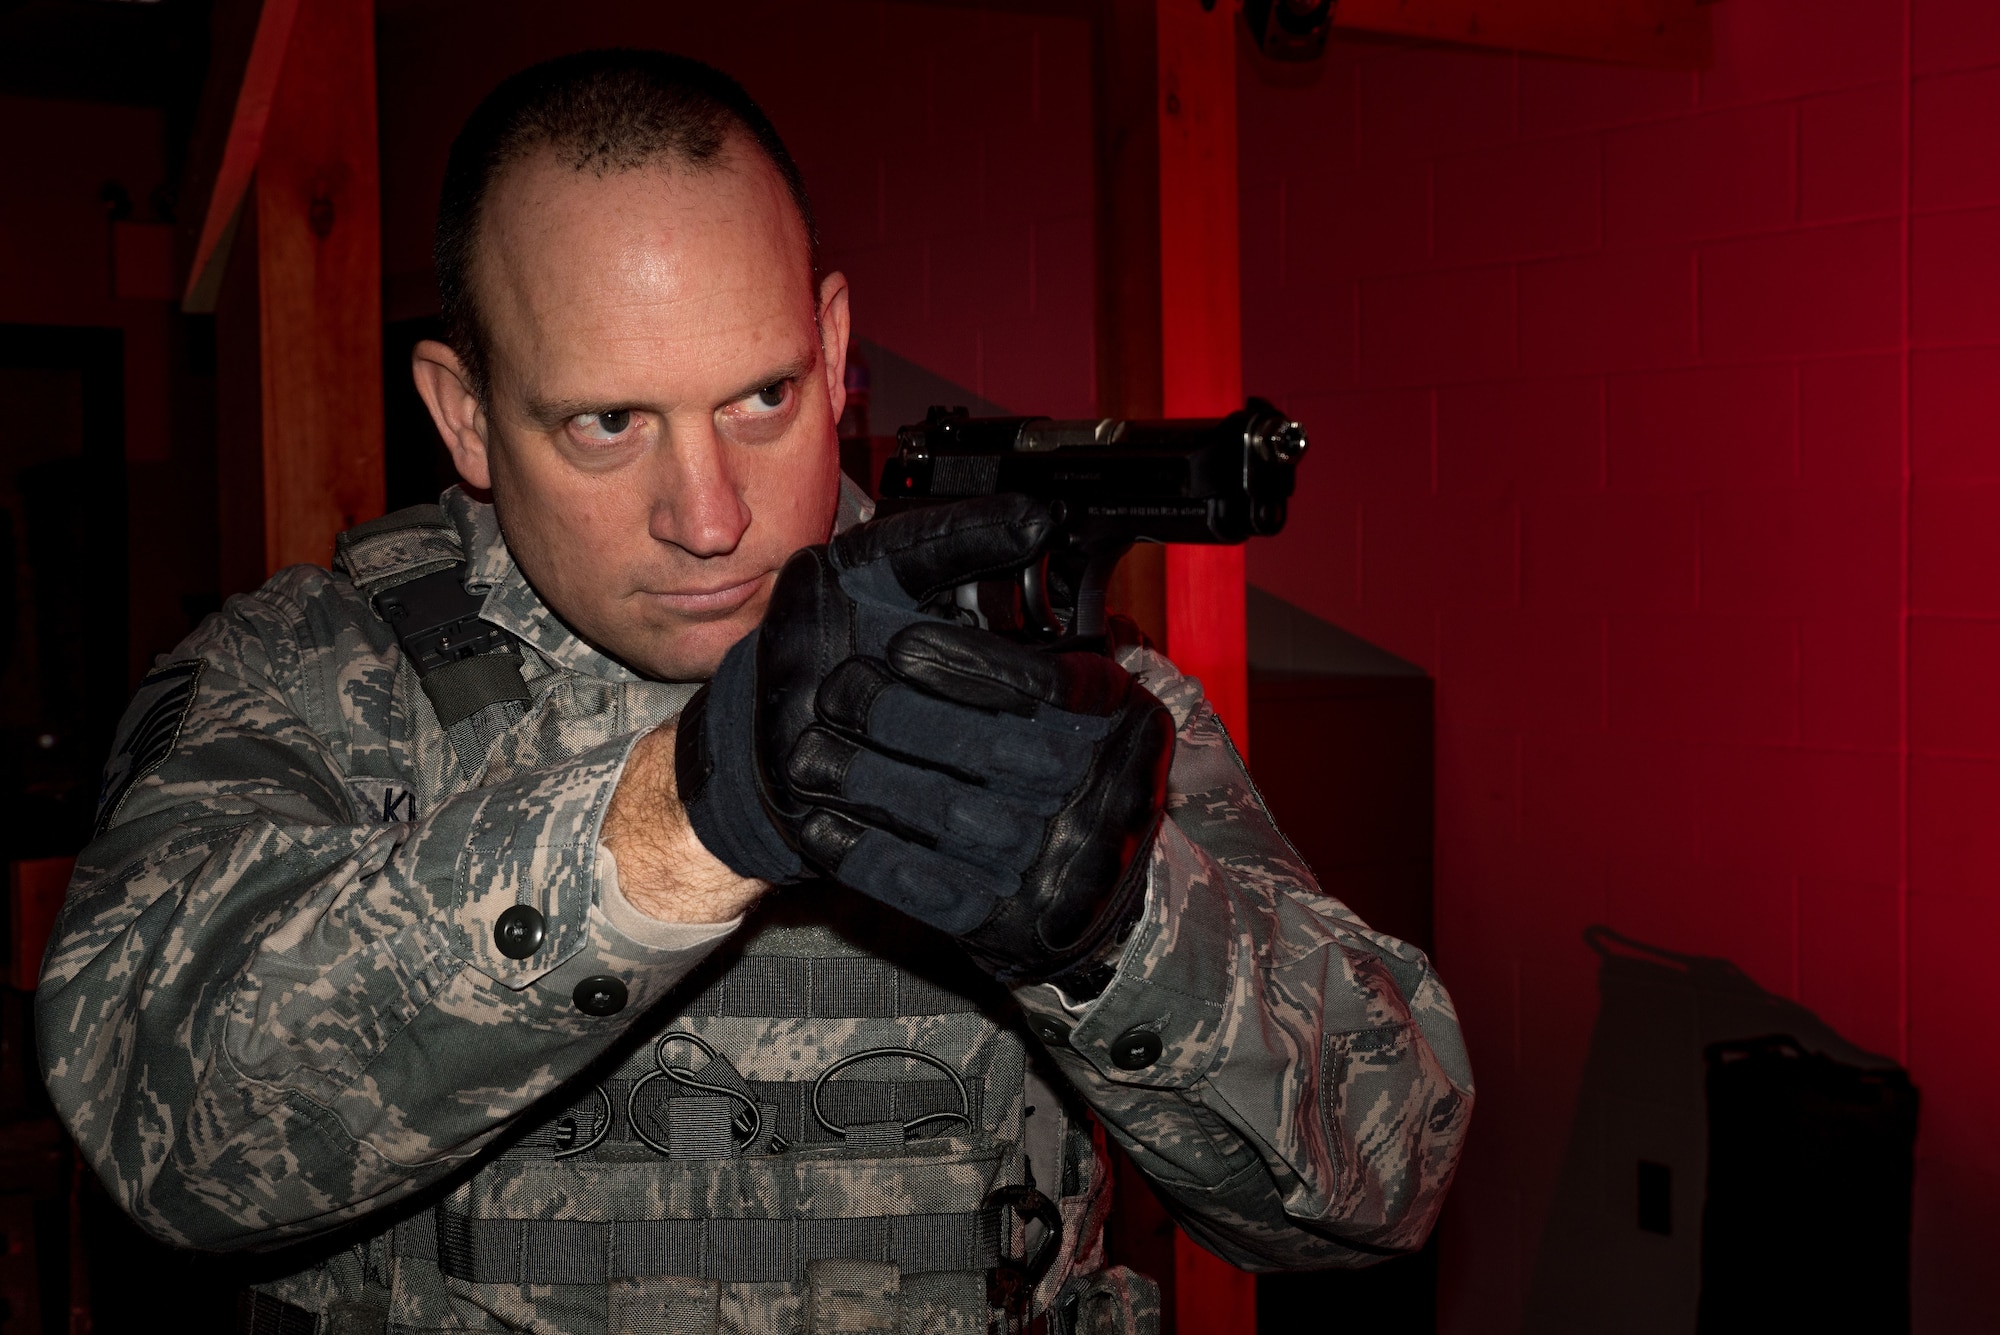 Master Sgt. Glen Kramlinger, Standarization and Evaluations non-commissioned officer in charge for the 934th Security Forces Squadron, takes aim on the Multiple Interactive Learning Objectives simulator at the Minneapolis-St. Paul Air Reserve Station, Minn. on Dec. 14, 2017. The MILO system is an interactive Use-of-Force and tactical judgment training program used to simulate realistic law-enforcement and perimeter security scenarios. (U.S. Air Force photo by Master Sgt. Eric Amidon)